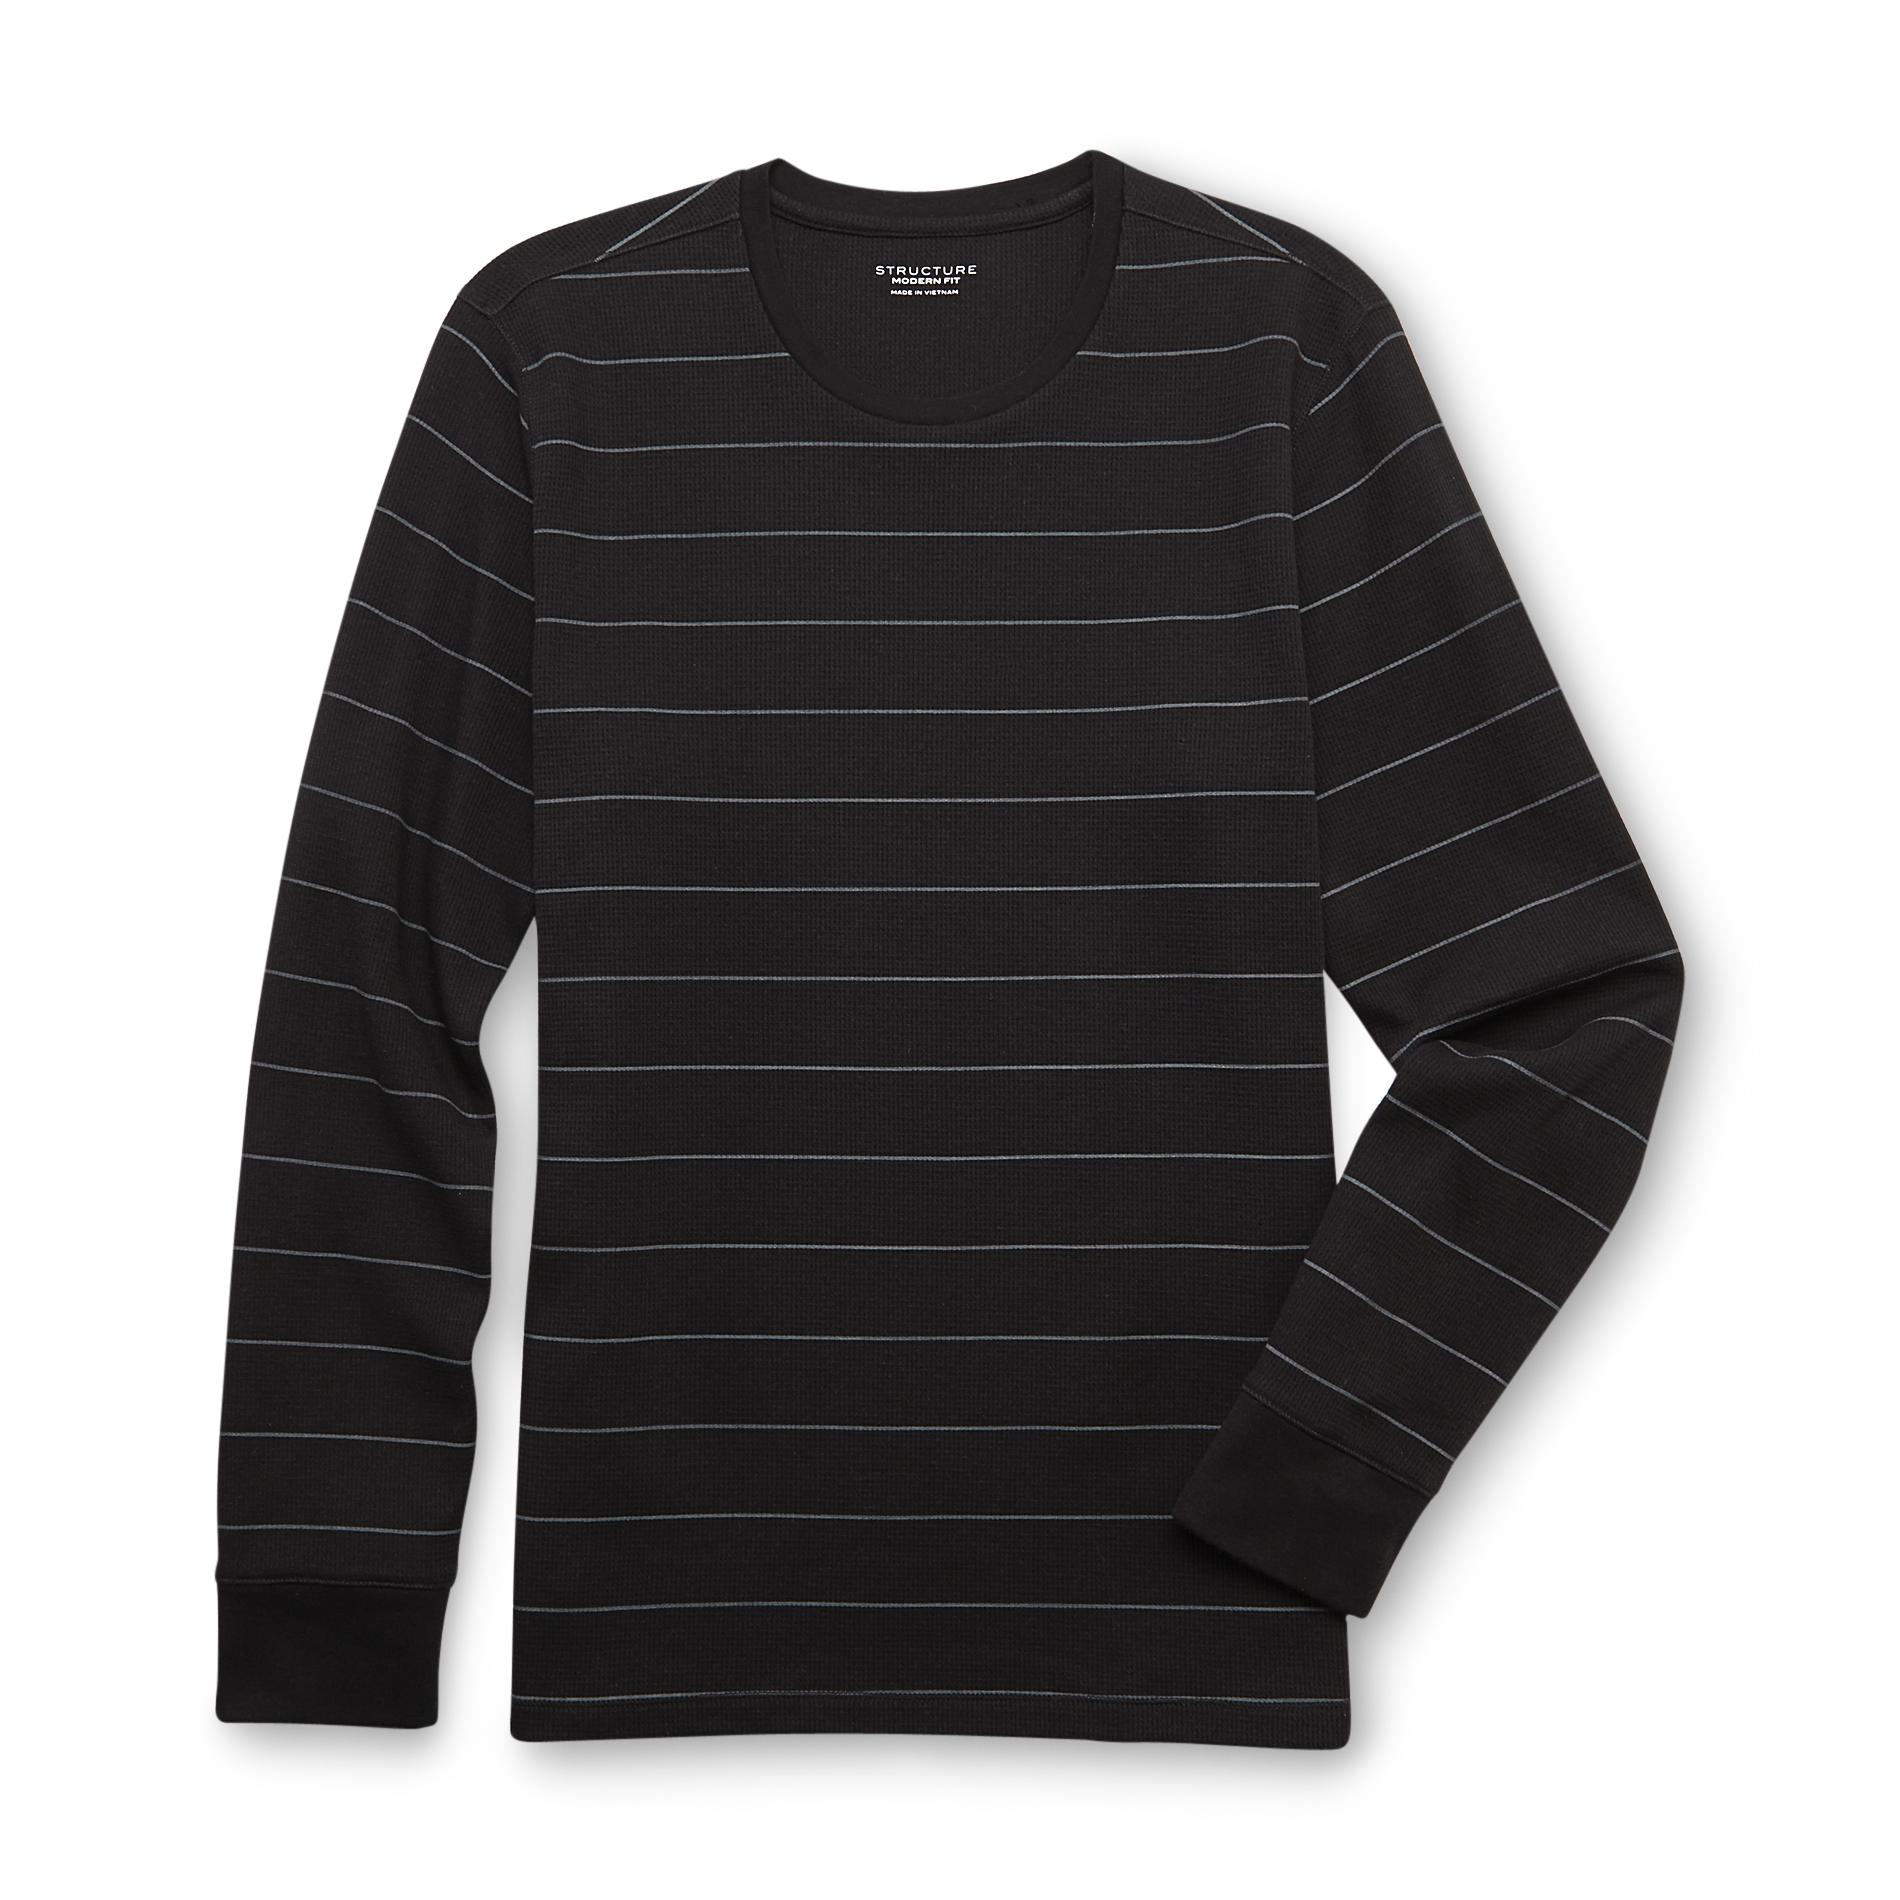 Structure Men's Thermal T-Shirt - Striped